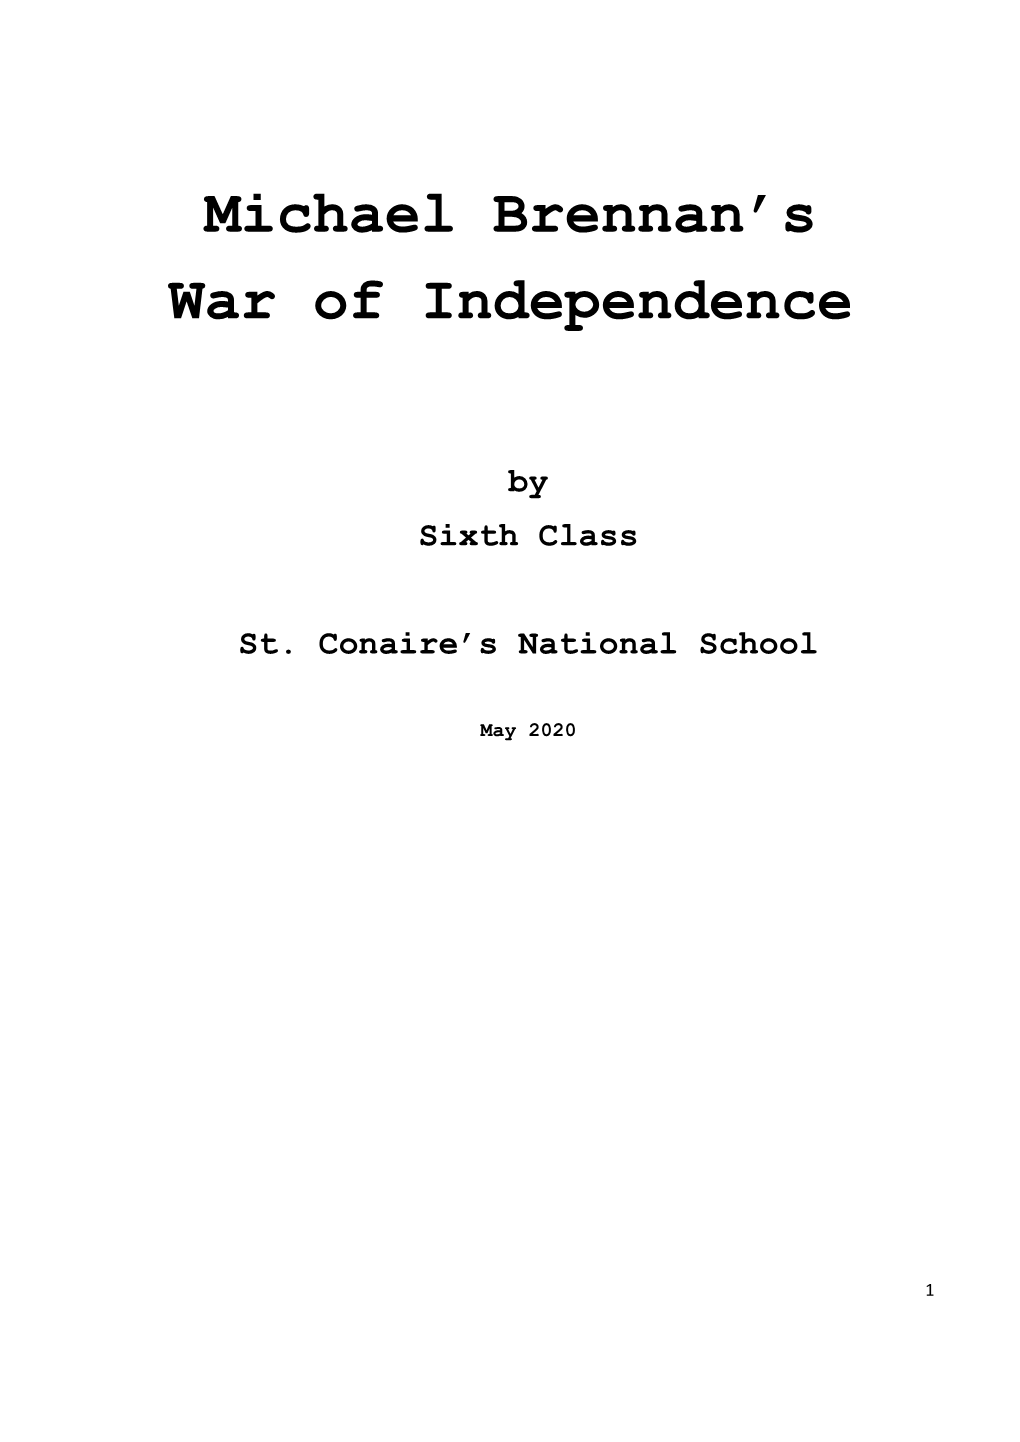 Michael Brennan's War of Independence